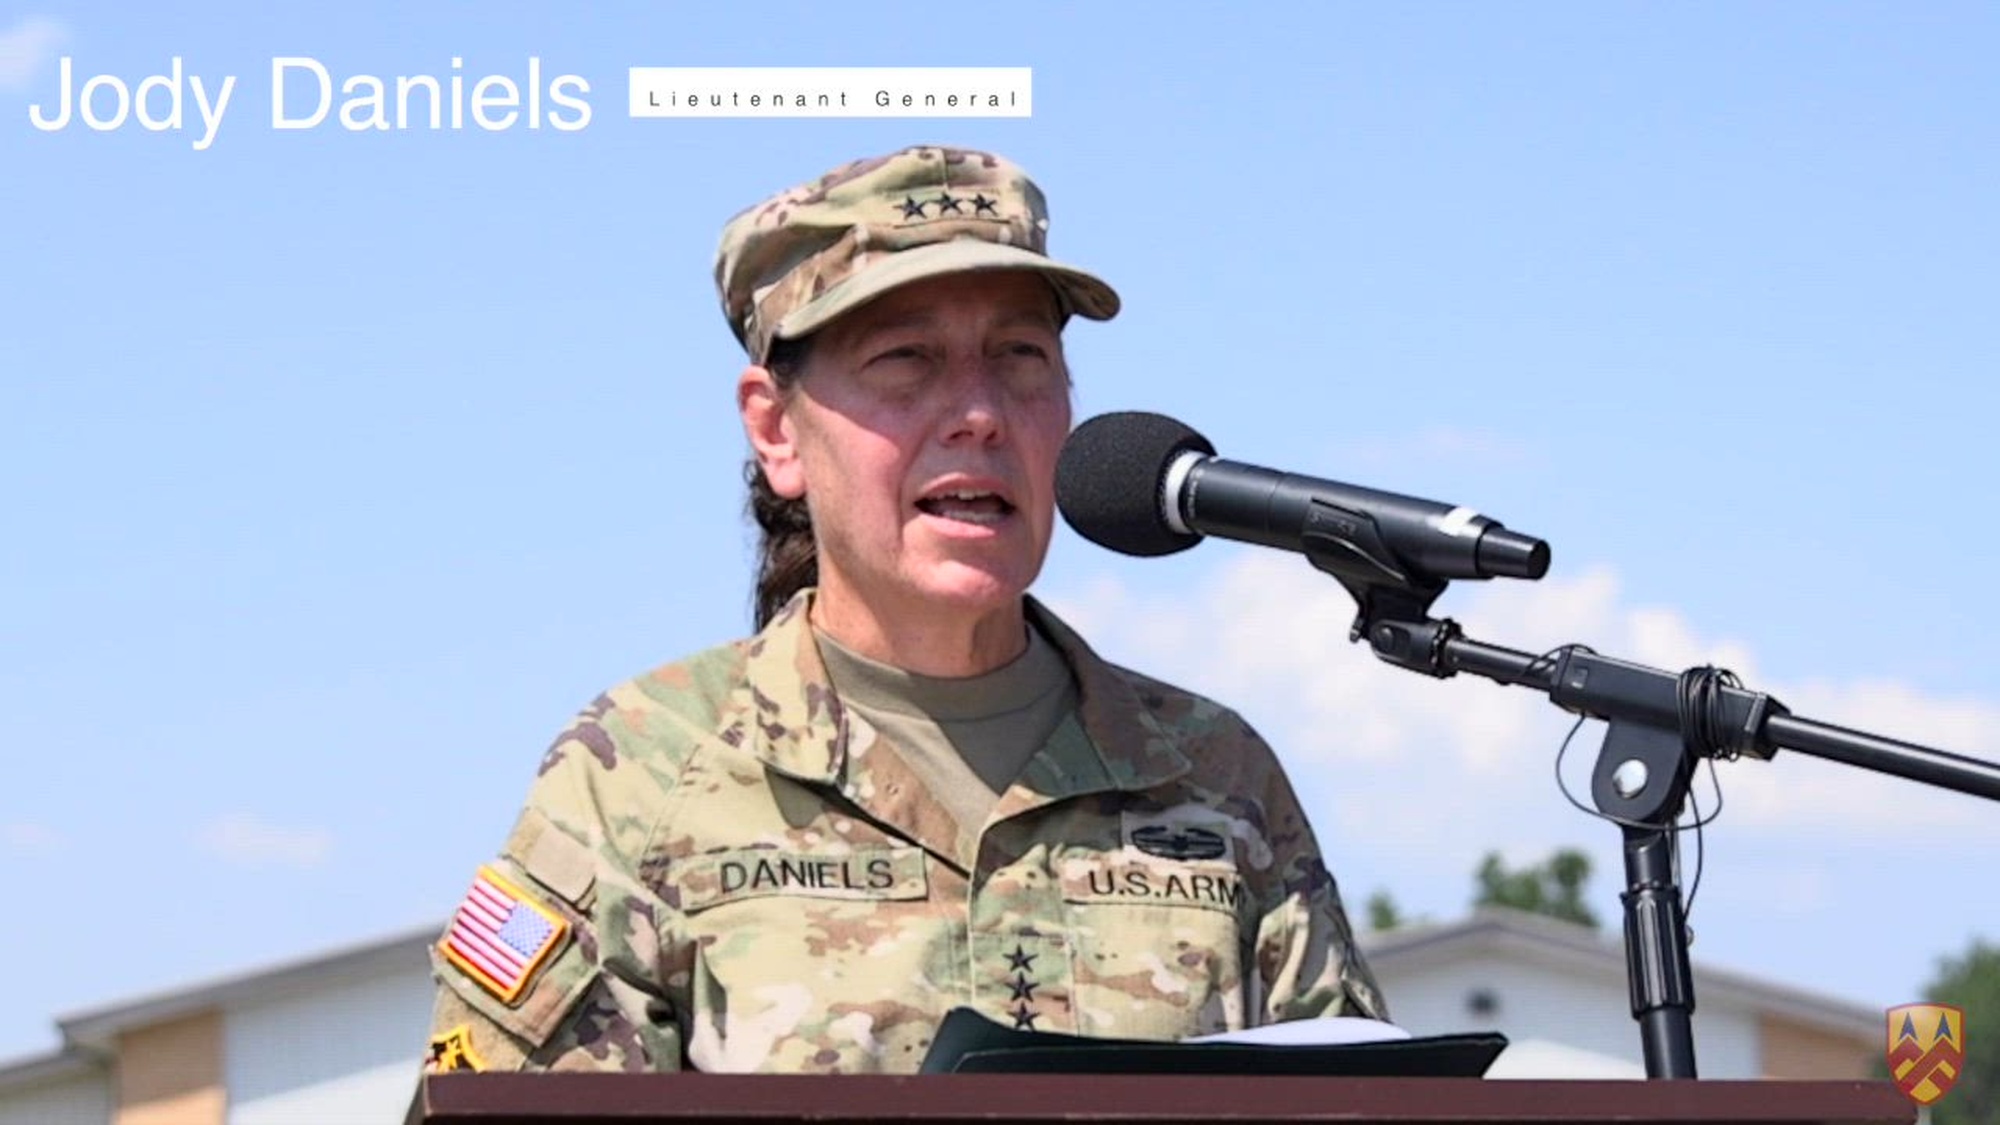 The U.S. Army Reserve Command Commanding General, Lt. Gen. Jody Daniels,  praises the accomplishments of the 377th under its former commander, as Maj.Gen. Susan Henderson and 377th TSC Commanding General, Brig. Gen. Justin Swanson reflect on the team, leadership and Soldiers who make it all happen.